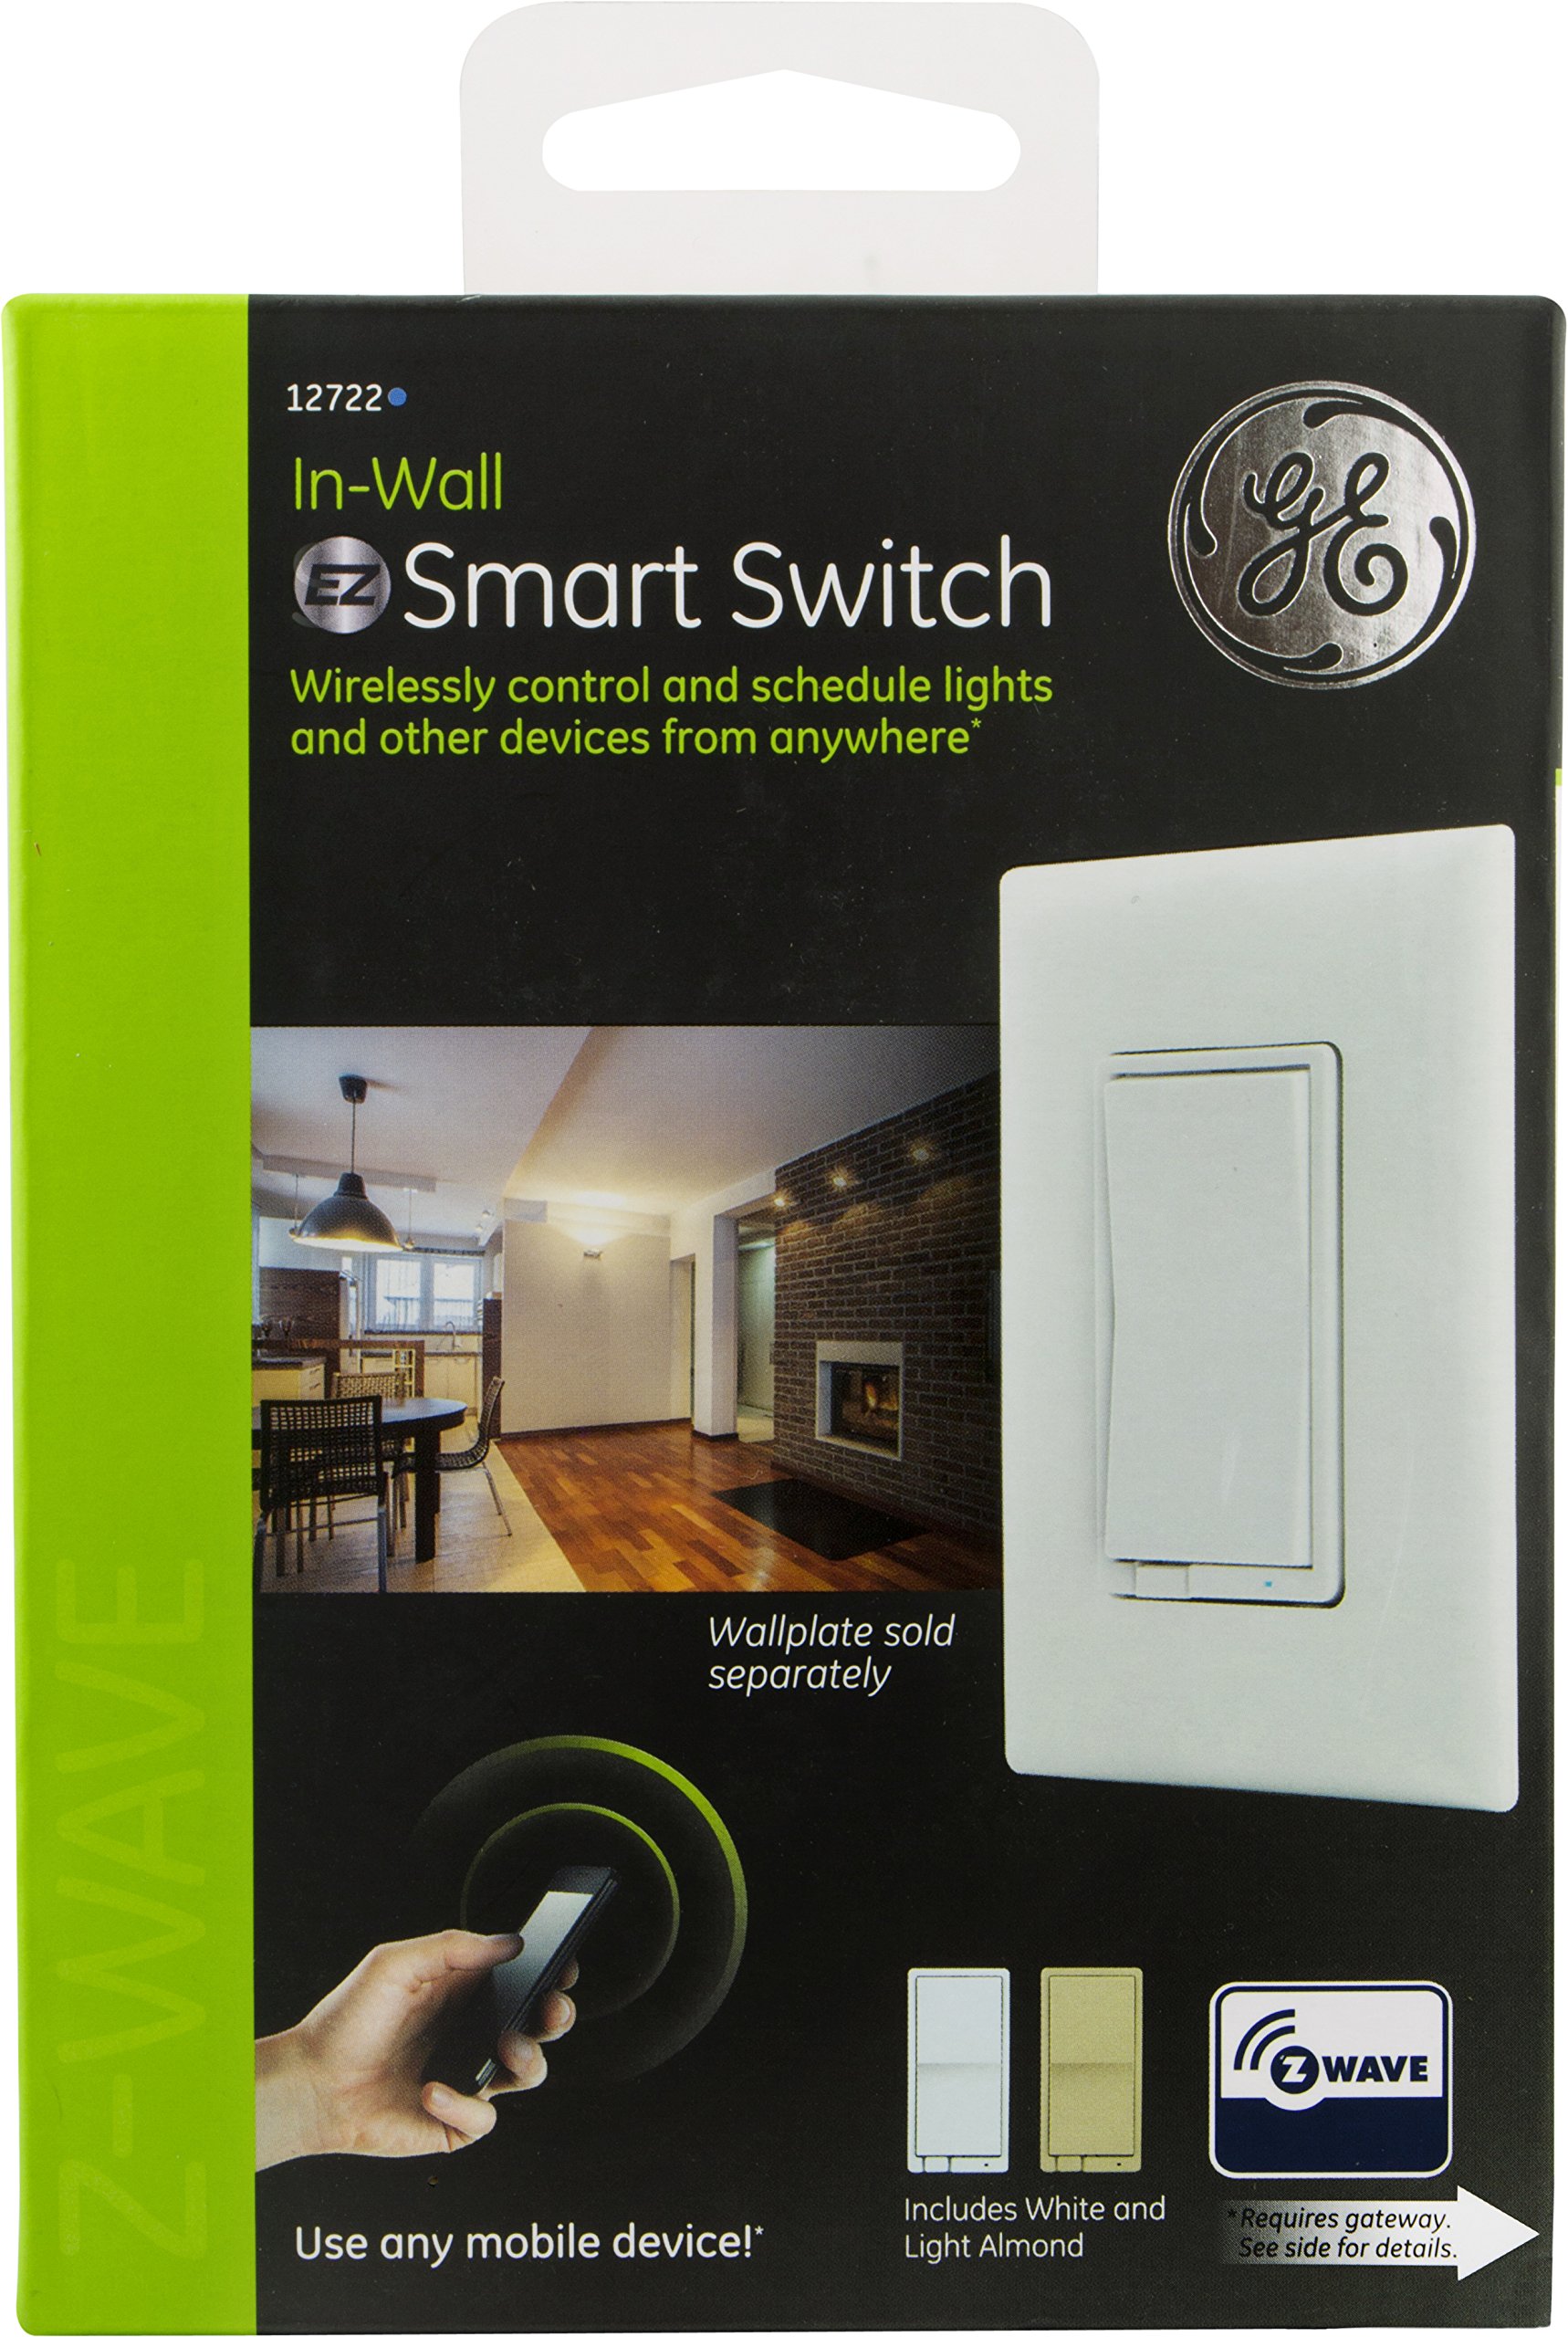 GE Z-Wave Wireless Smart Lighting Control Light Switch, On/Off Paddle, In-Wall, White & Lt. Almond Paddles, Repeater & Range Extender, Zwave Hub Required- Works with SmartThings Wink and Alexa, 12722